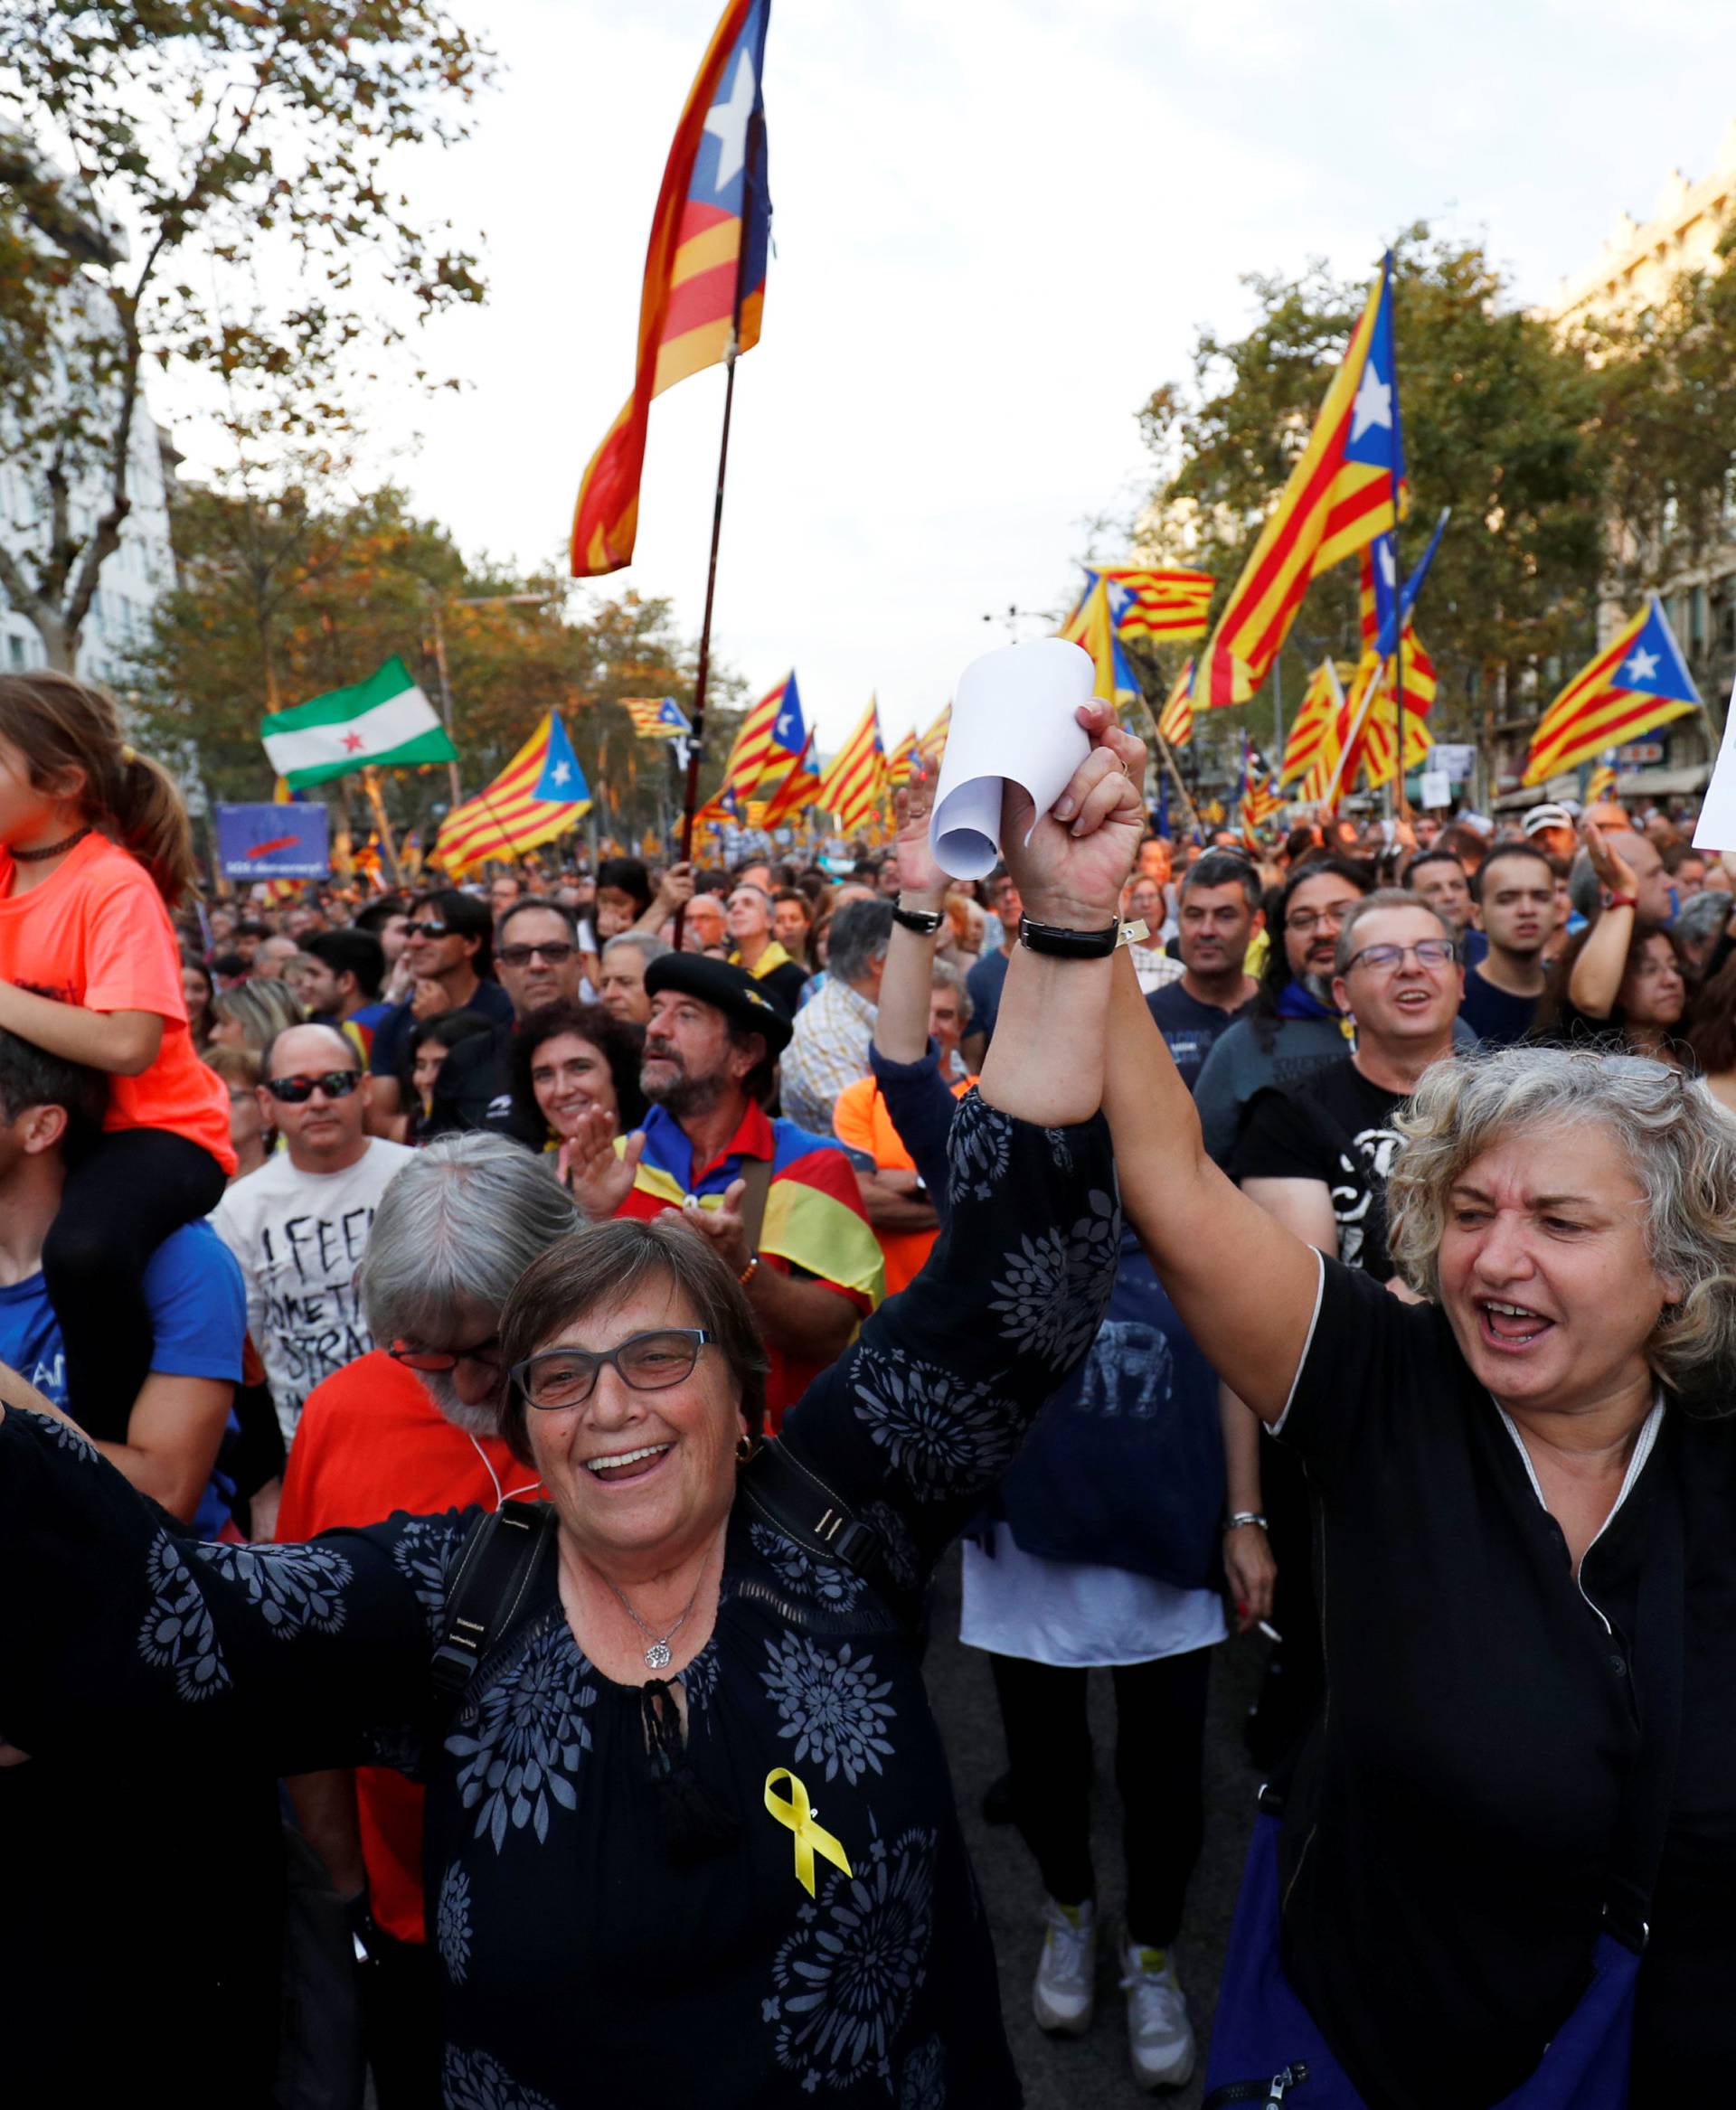 People wave separatist Catalonian flags and placards during a demonstration organised by Catalan pro-independence movements ANC (Catalan National Assembly) and Omnium Cutural, following the imprisonment of their two leaders, in